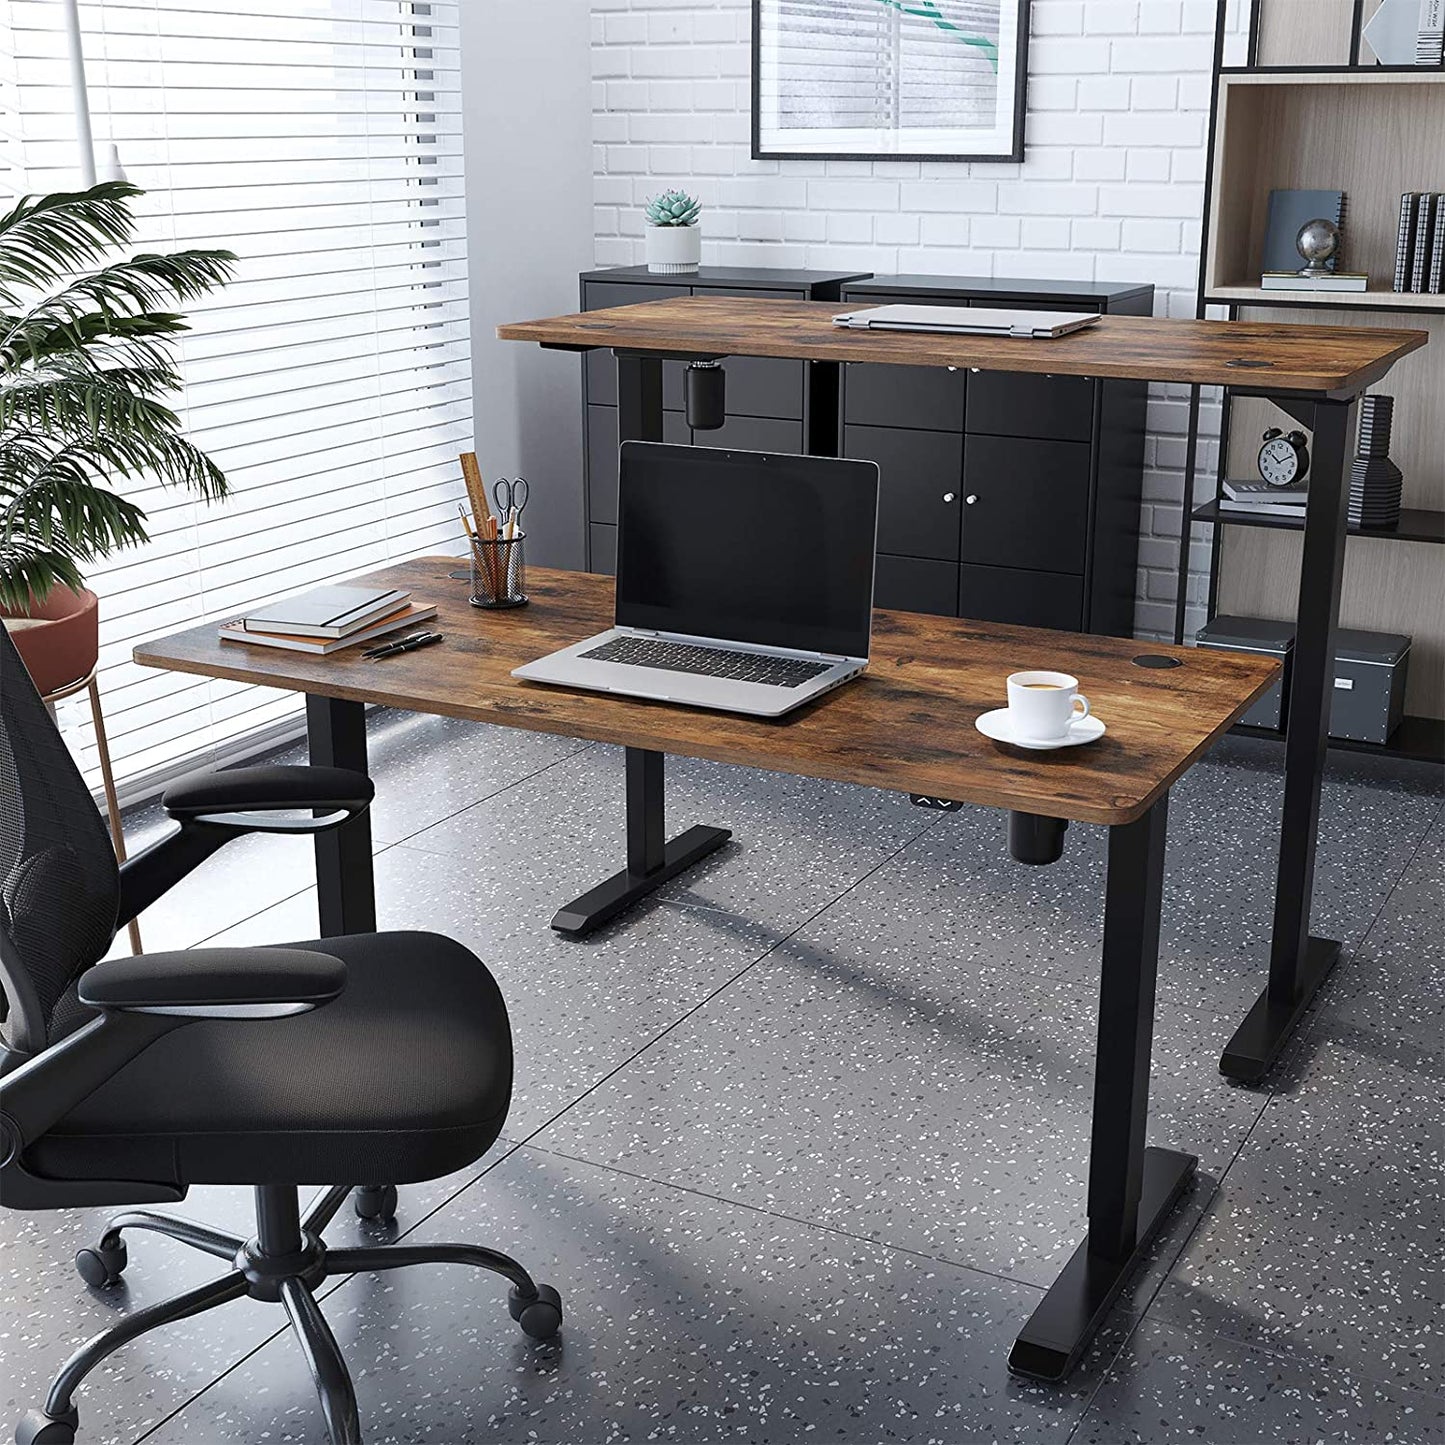 Nancy's Kingman Desk - Electrically Adjustable - Sit-Stand Table - Workplace - Industrial - 140 x 70 cm